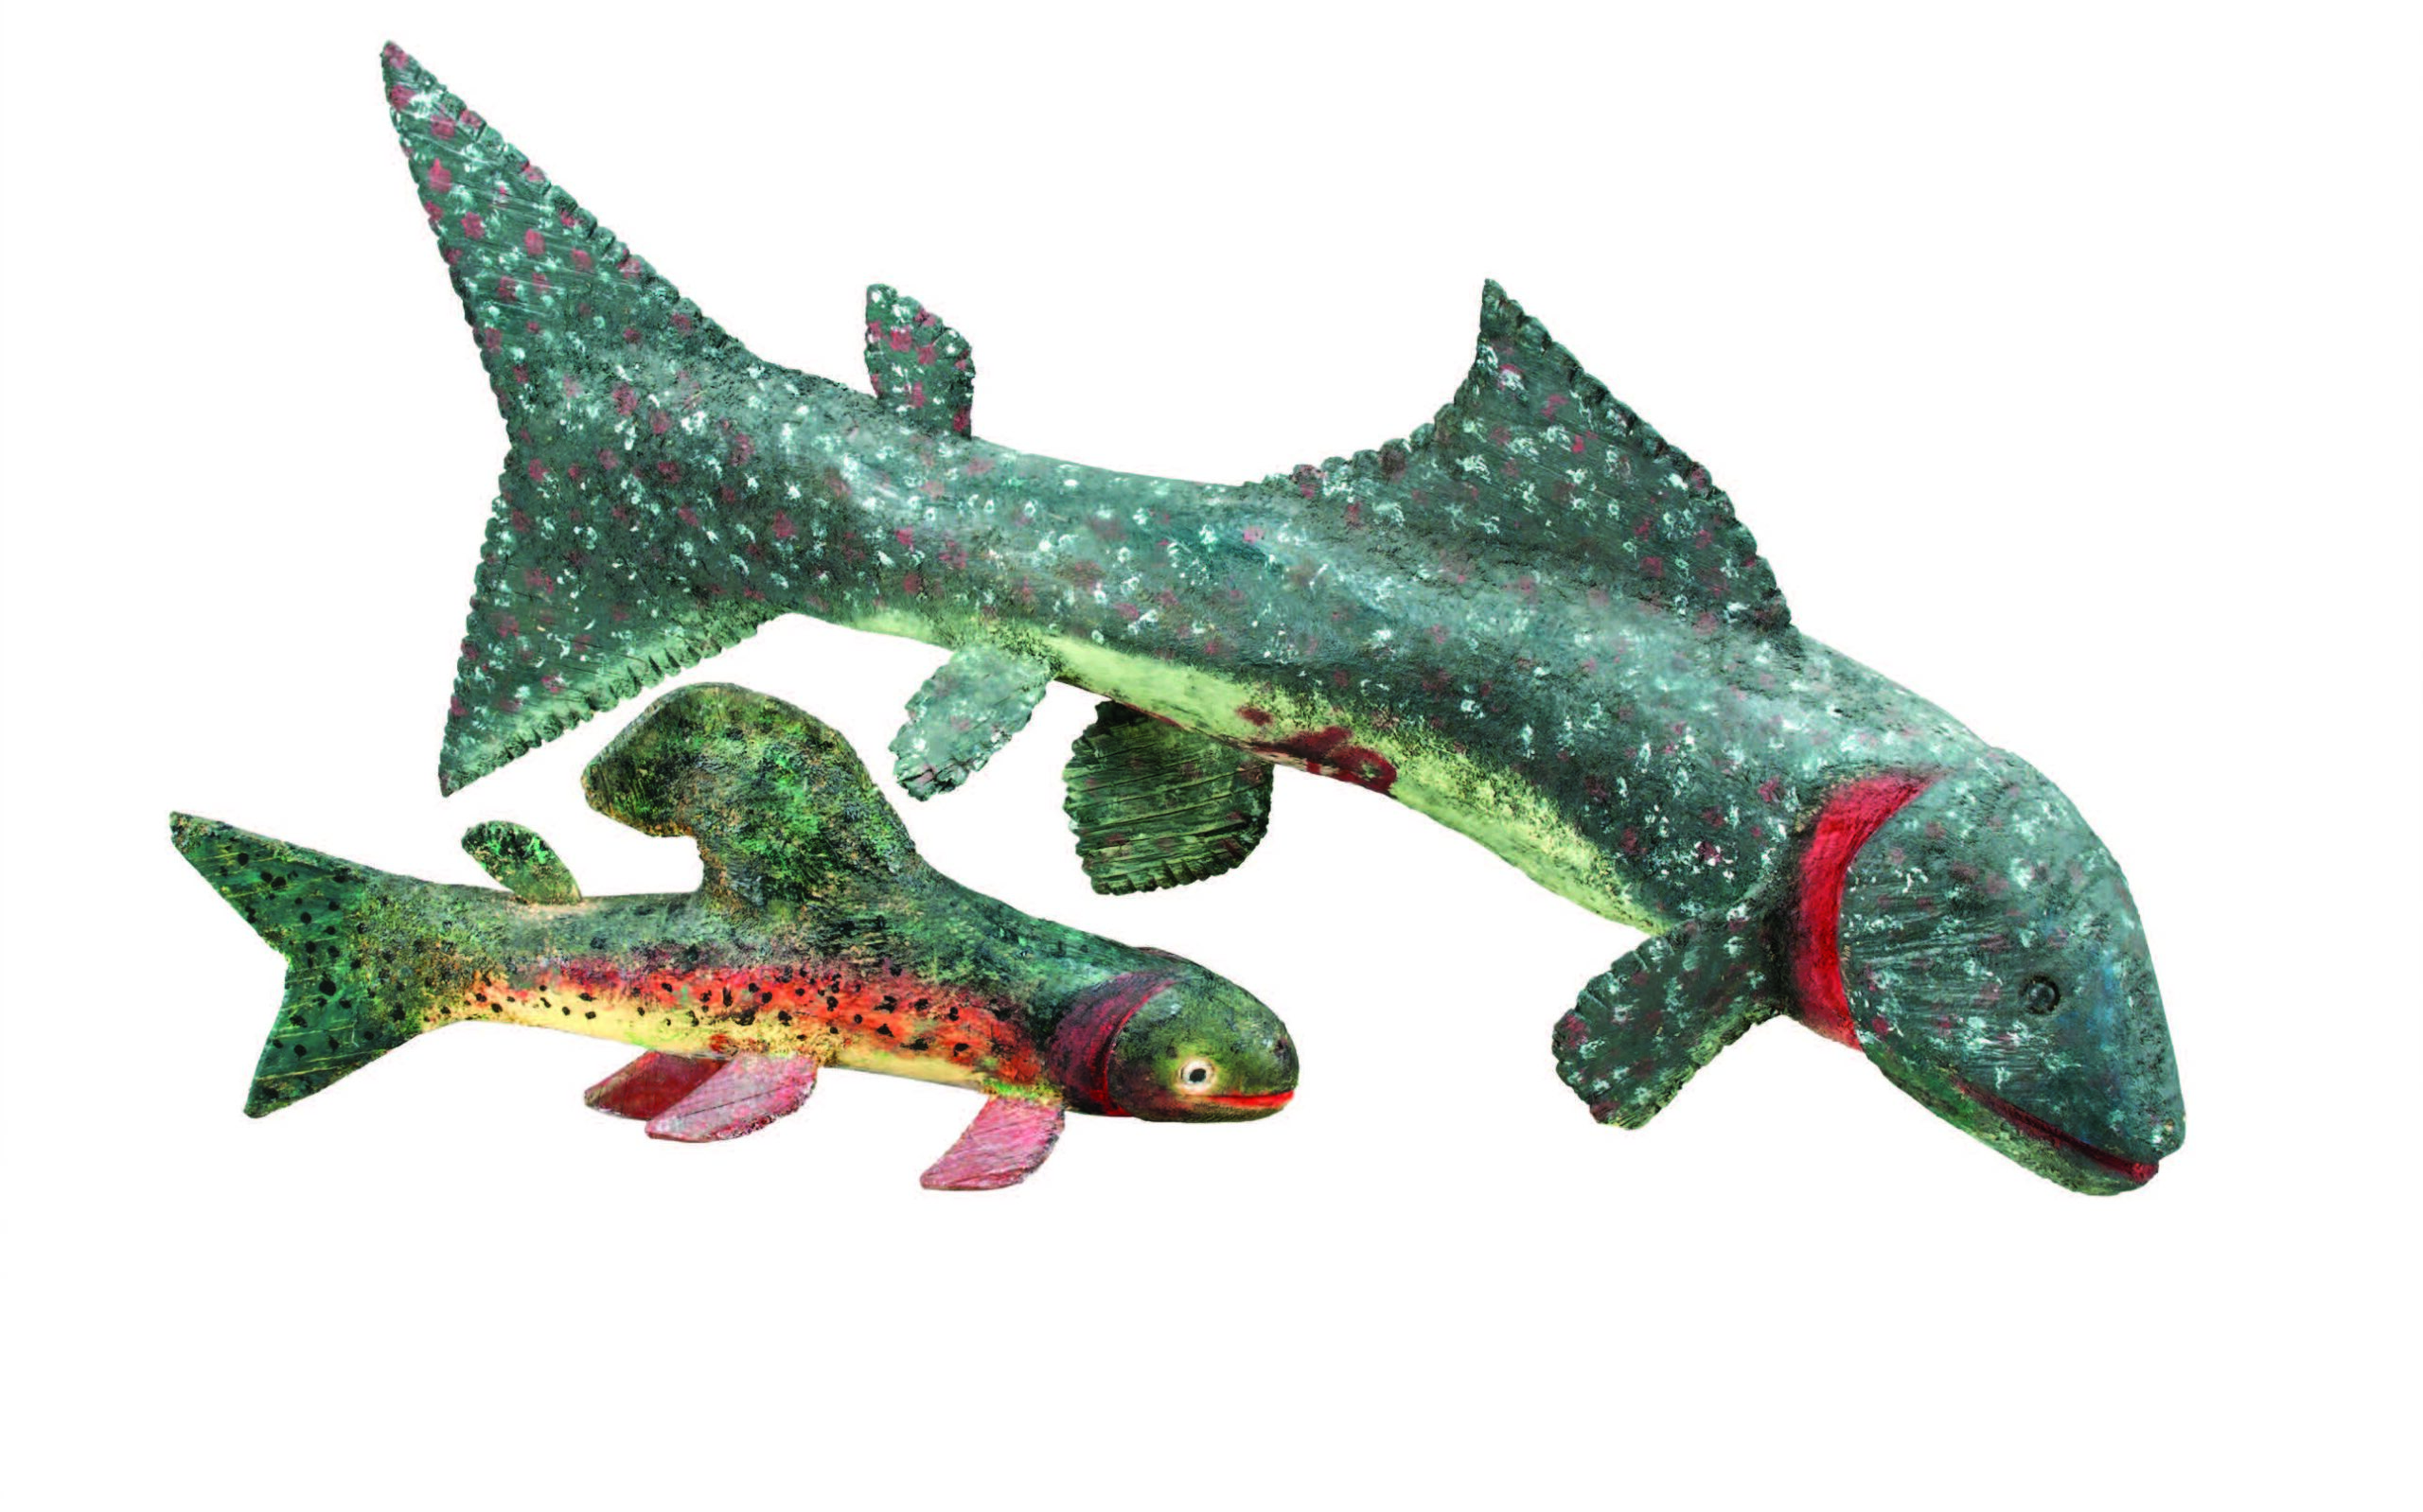 Felipe Archuleta, Rainbow Trout, 1982, wood, paint. Gift of Gil Hitchcock, MOIFA A.1995.70.1. Felipe Archuleta, Trout, 1976, wood, paint. Purchased with funds from the National Endowment for the Arts, MOIFA A.1976.50.1.